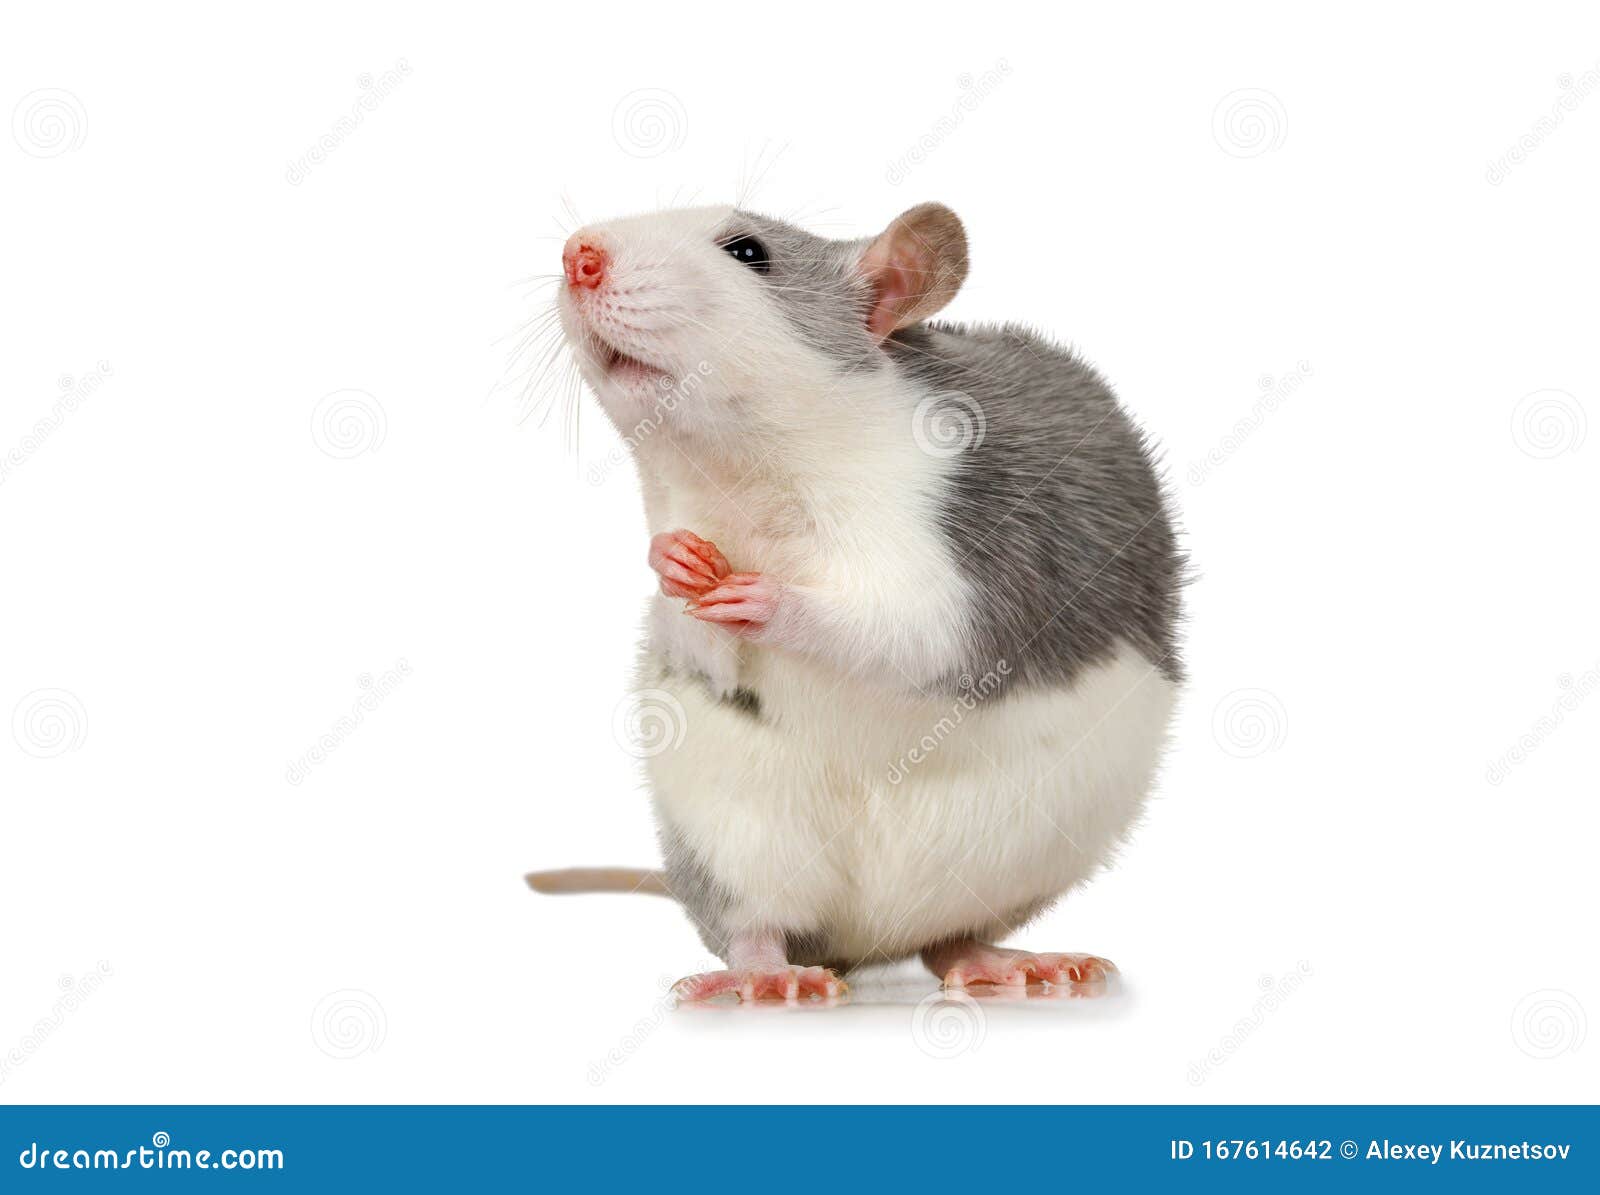 Little Cute Rat Sits on Its Hind Legs Stock Photo - Image of gray ...